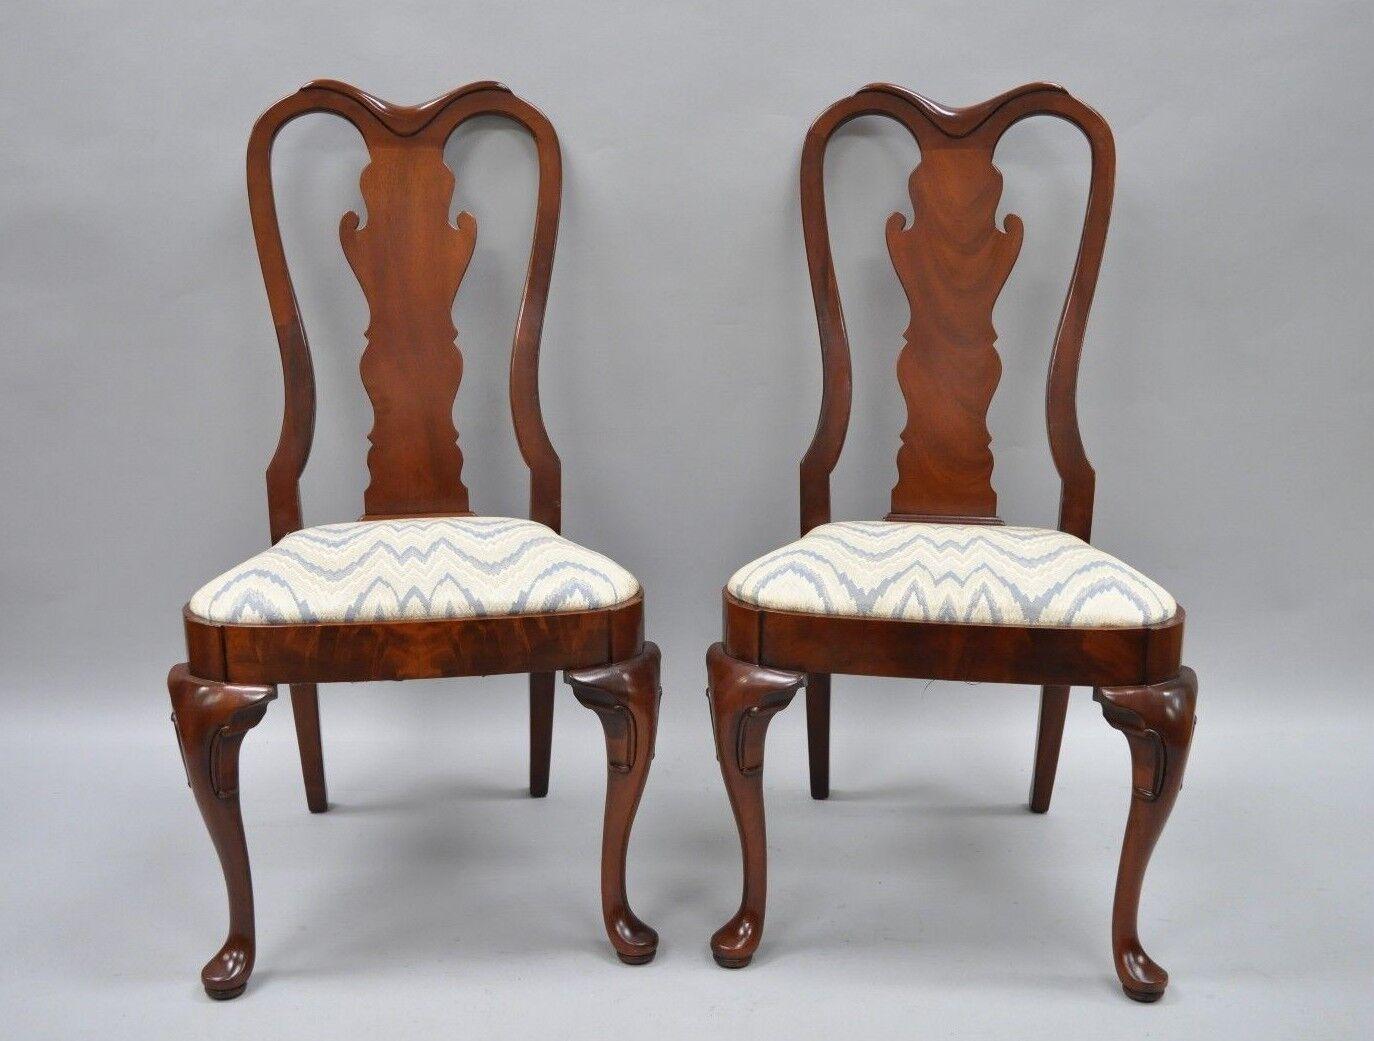 Pair of Vintage Queen Anne Style crotch mahogany dining room side chairs. Item features Queen Anne legs, solid wood frames, beautiful woodgrain, upholstered seat, quality American craftsmanship. Circa mid to late 20th century. Measurements: 41